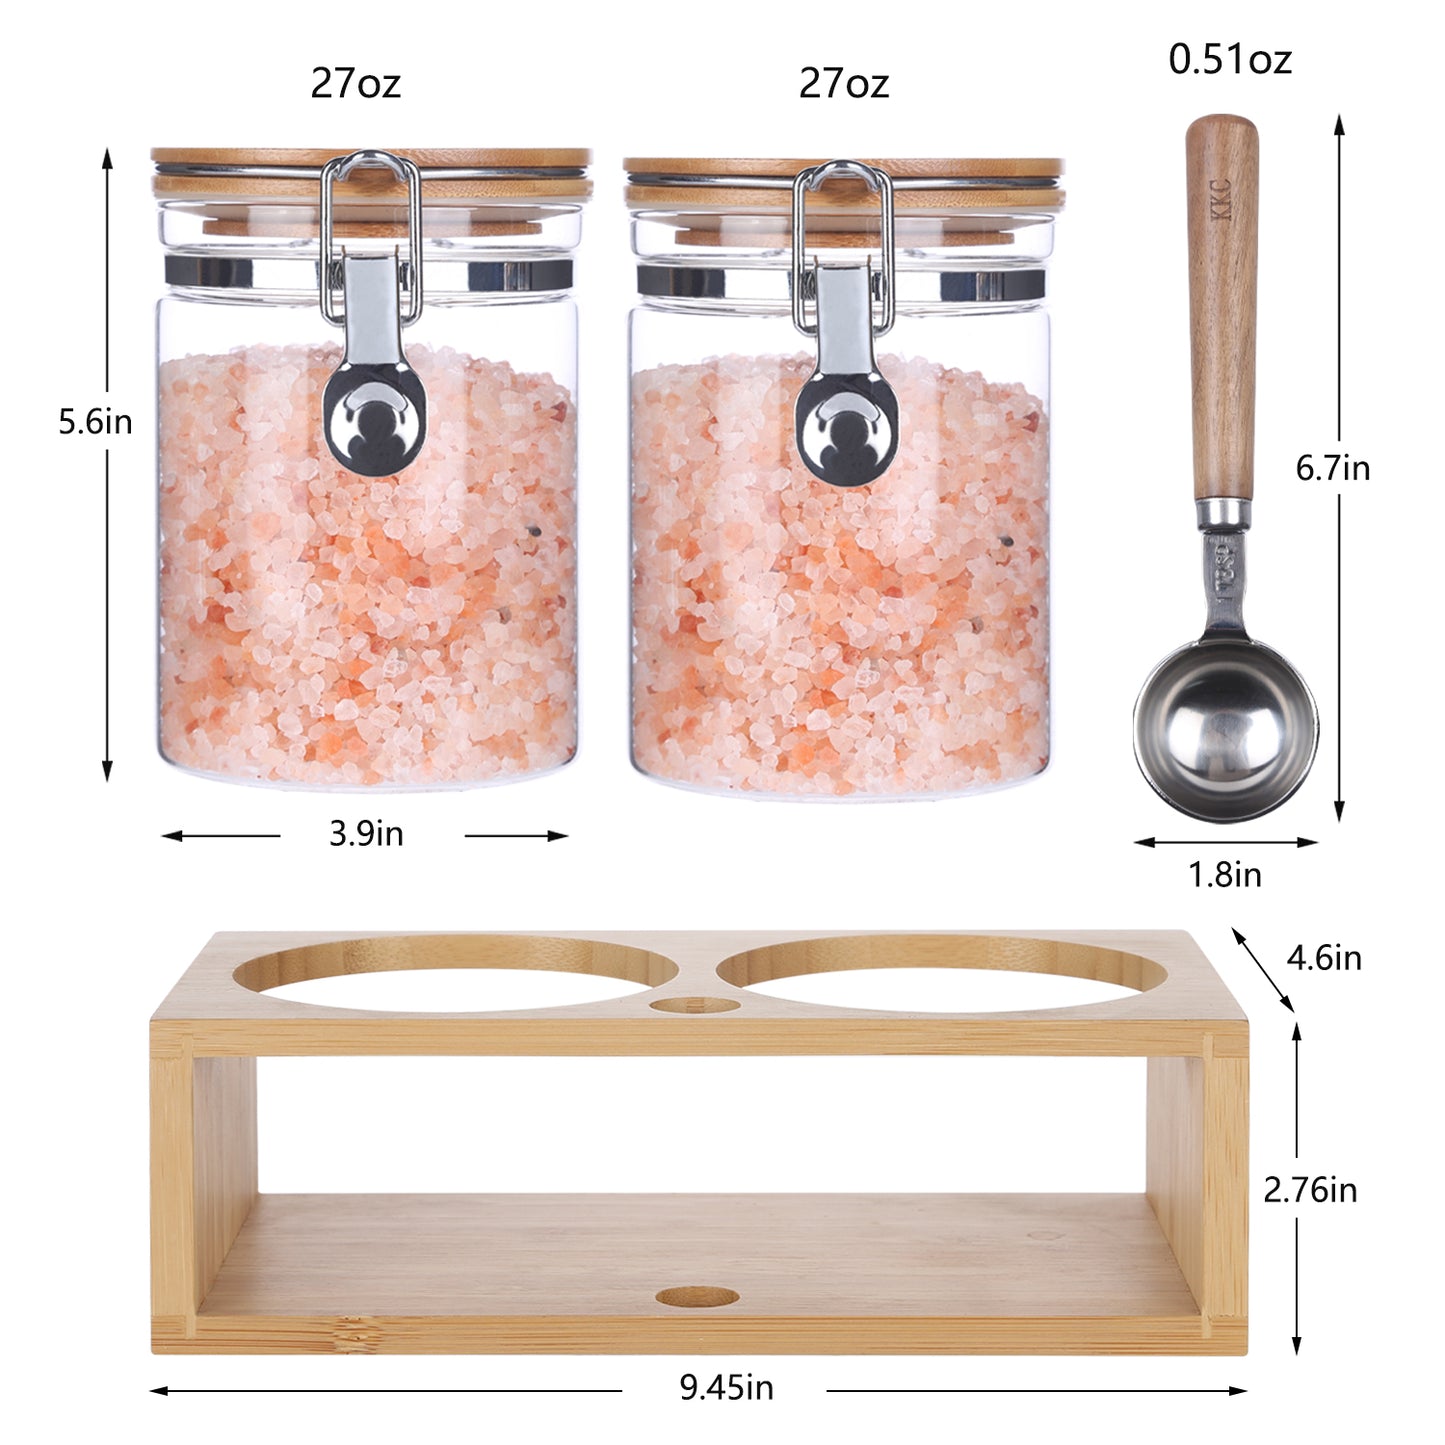 KKC HOME ACCENTS Borosilicate Glass Sugar Salt Storage Containers with Airtight Locking Clamp Lids,Sealed Glass Jar Canisters for Brown Sugar,Loose Tea,Coffee,27 Fluid-oz